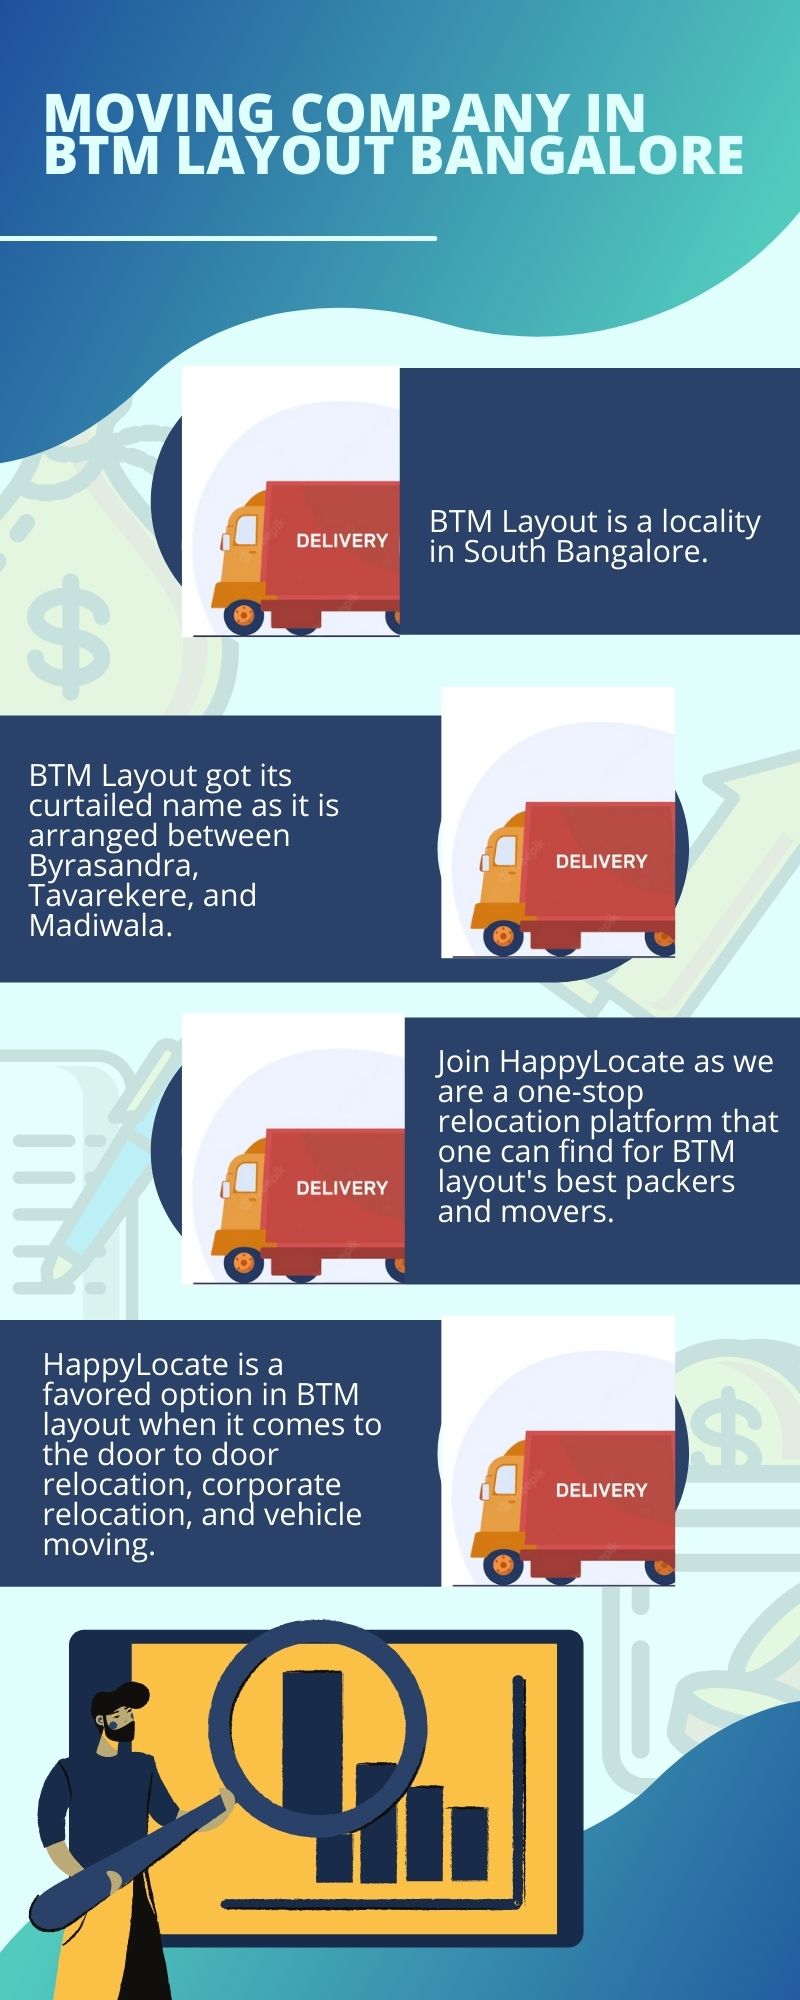 BTM Layout got its
curtailed name as it is
arranged between
Byrasandra,
Tavarekere, and
Madiwala.

DELIVERY

Happylocate is a
favored option in BTM
layout when it comes to
the door to door
relocation, corporate

relocation, and vehicle

moving.

BTM Layout is a locality
in South Bangalore.

Join HappyLocate as we
are a one-stop
relocation platform that
one can find for BTM
layout's best packers
and movers.